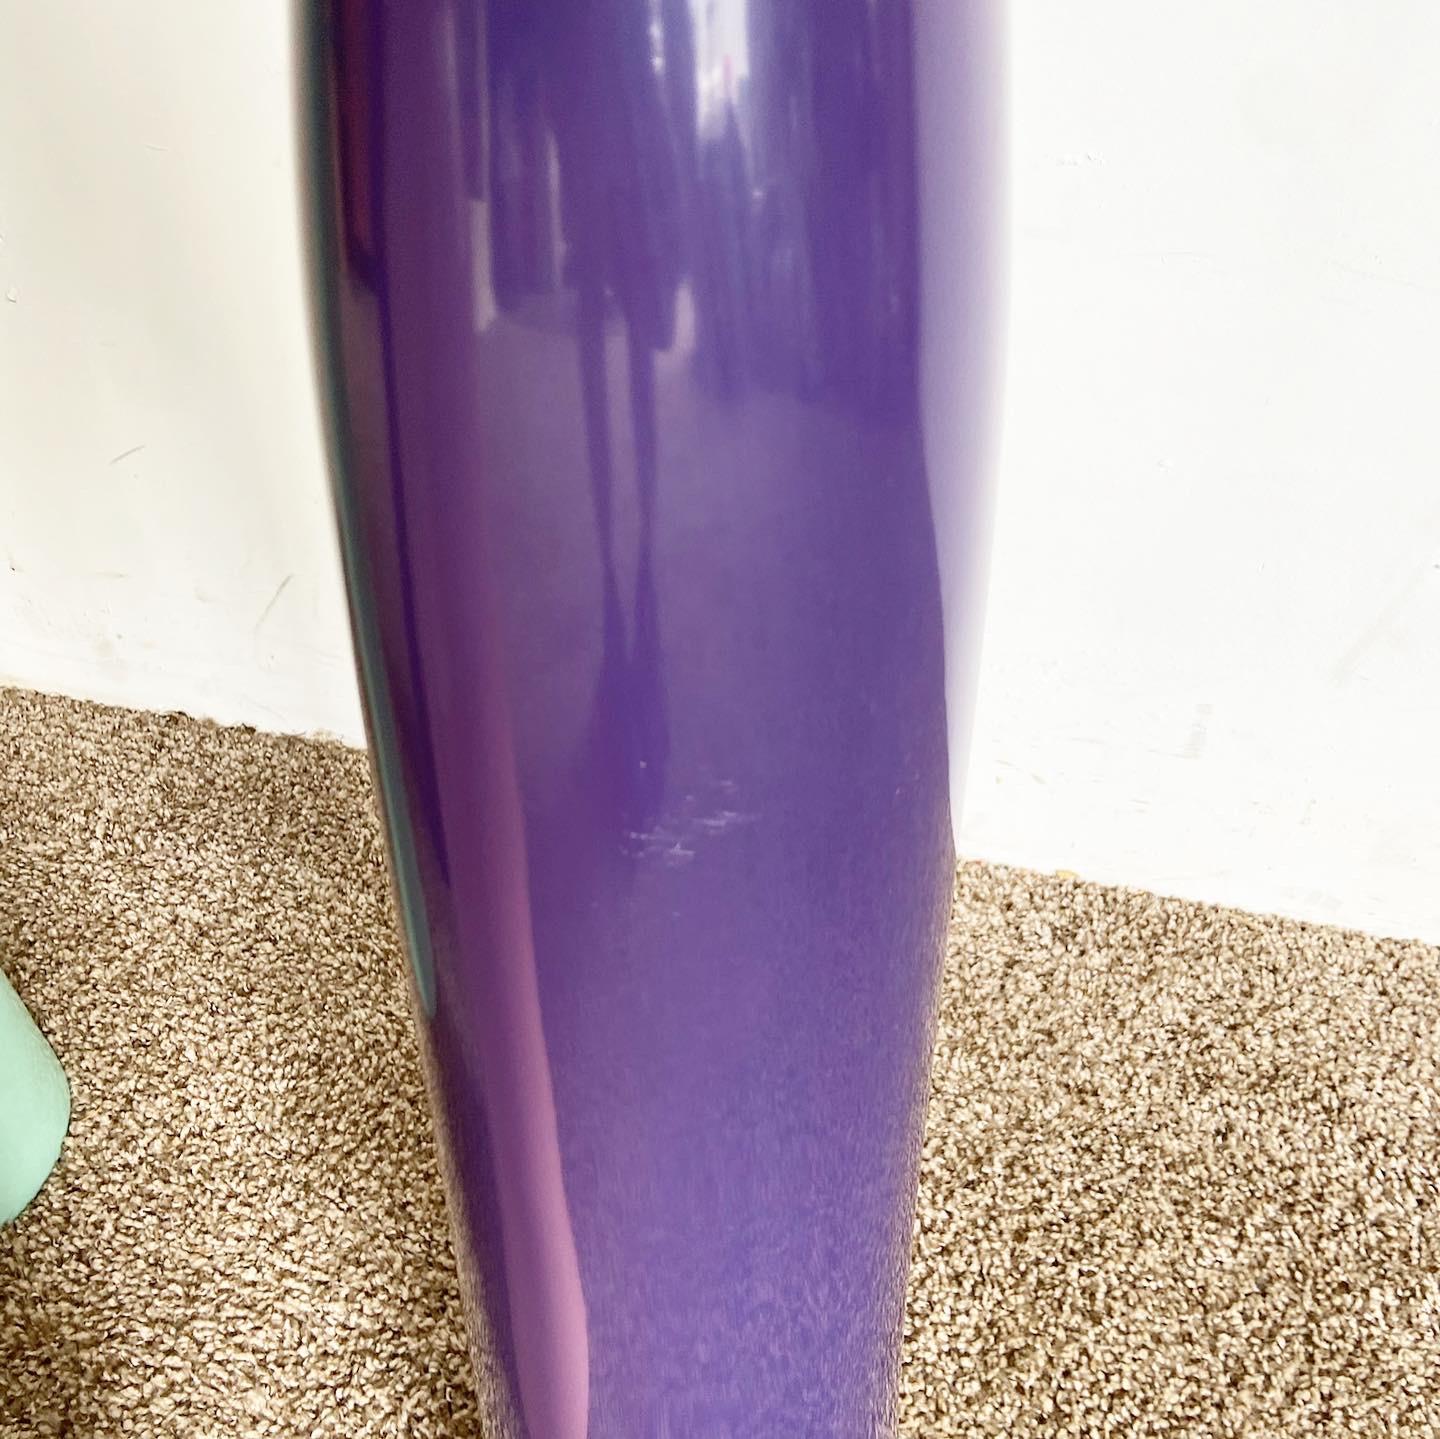 Metal Postmodern Vases by Oggetti in Pink, Purple, and Teal - 6 Pieces For Sale